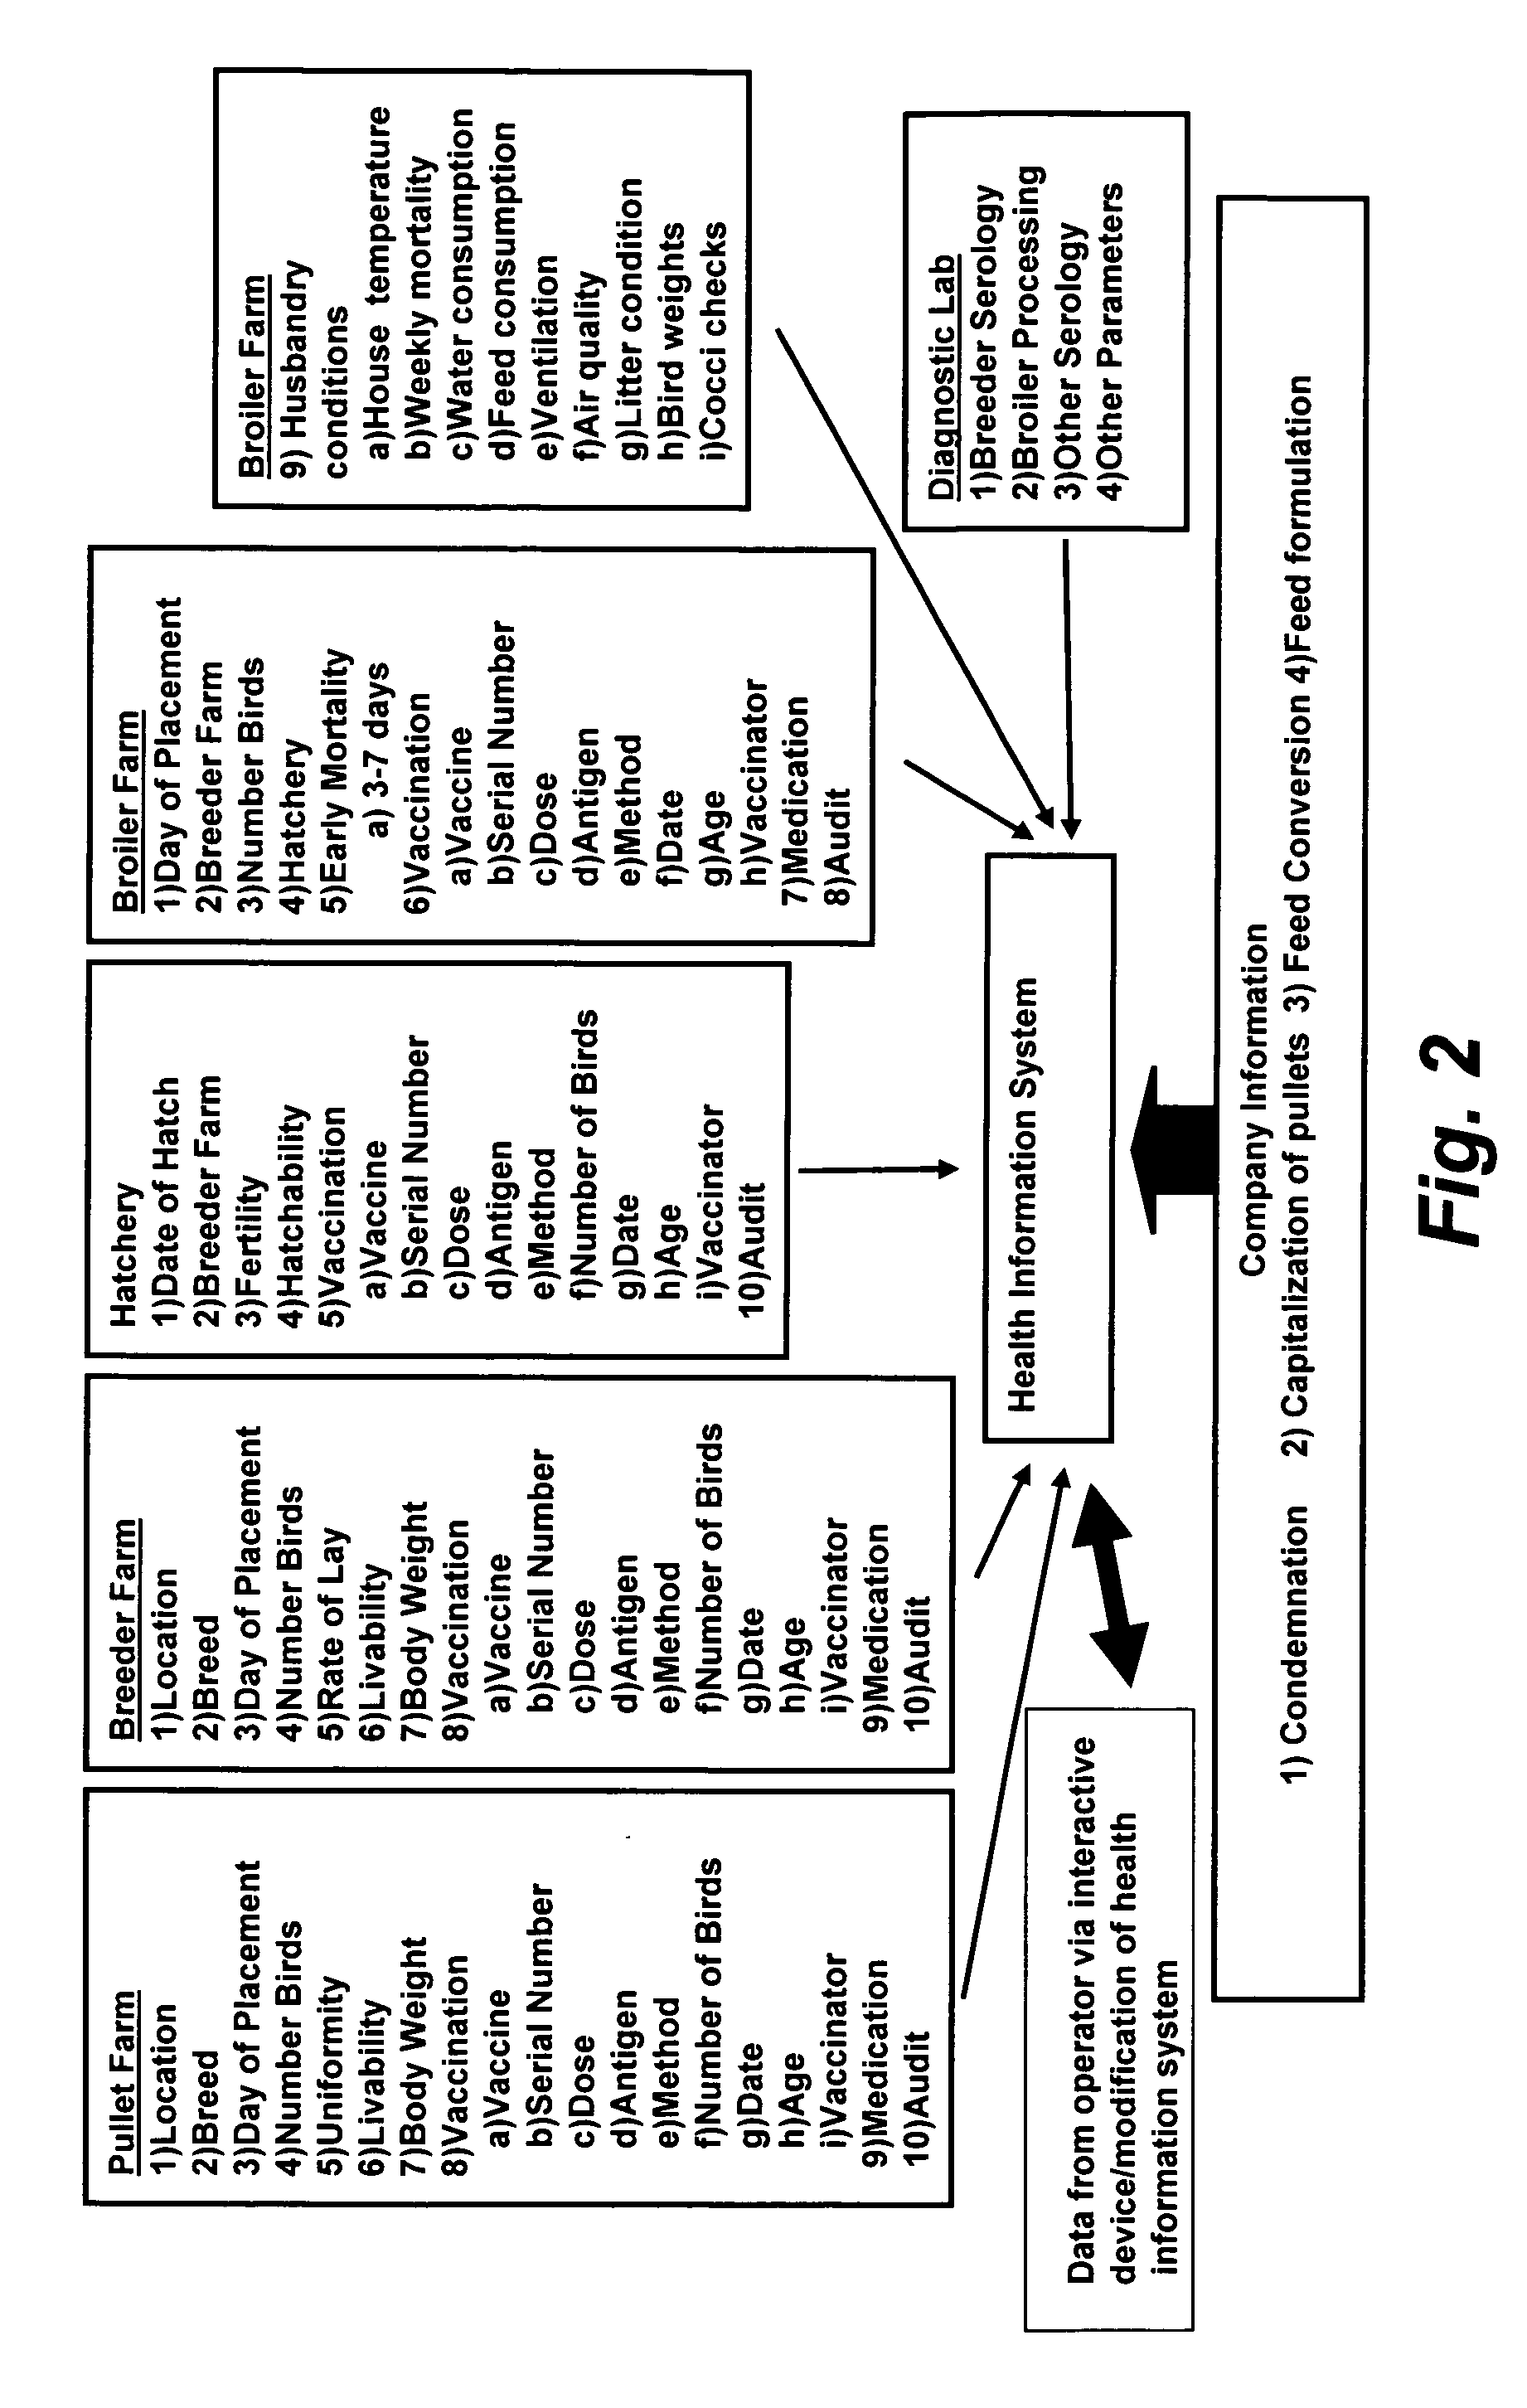 Systems and methods for improving efficiencies in avian species